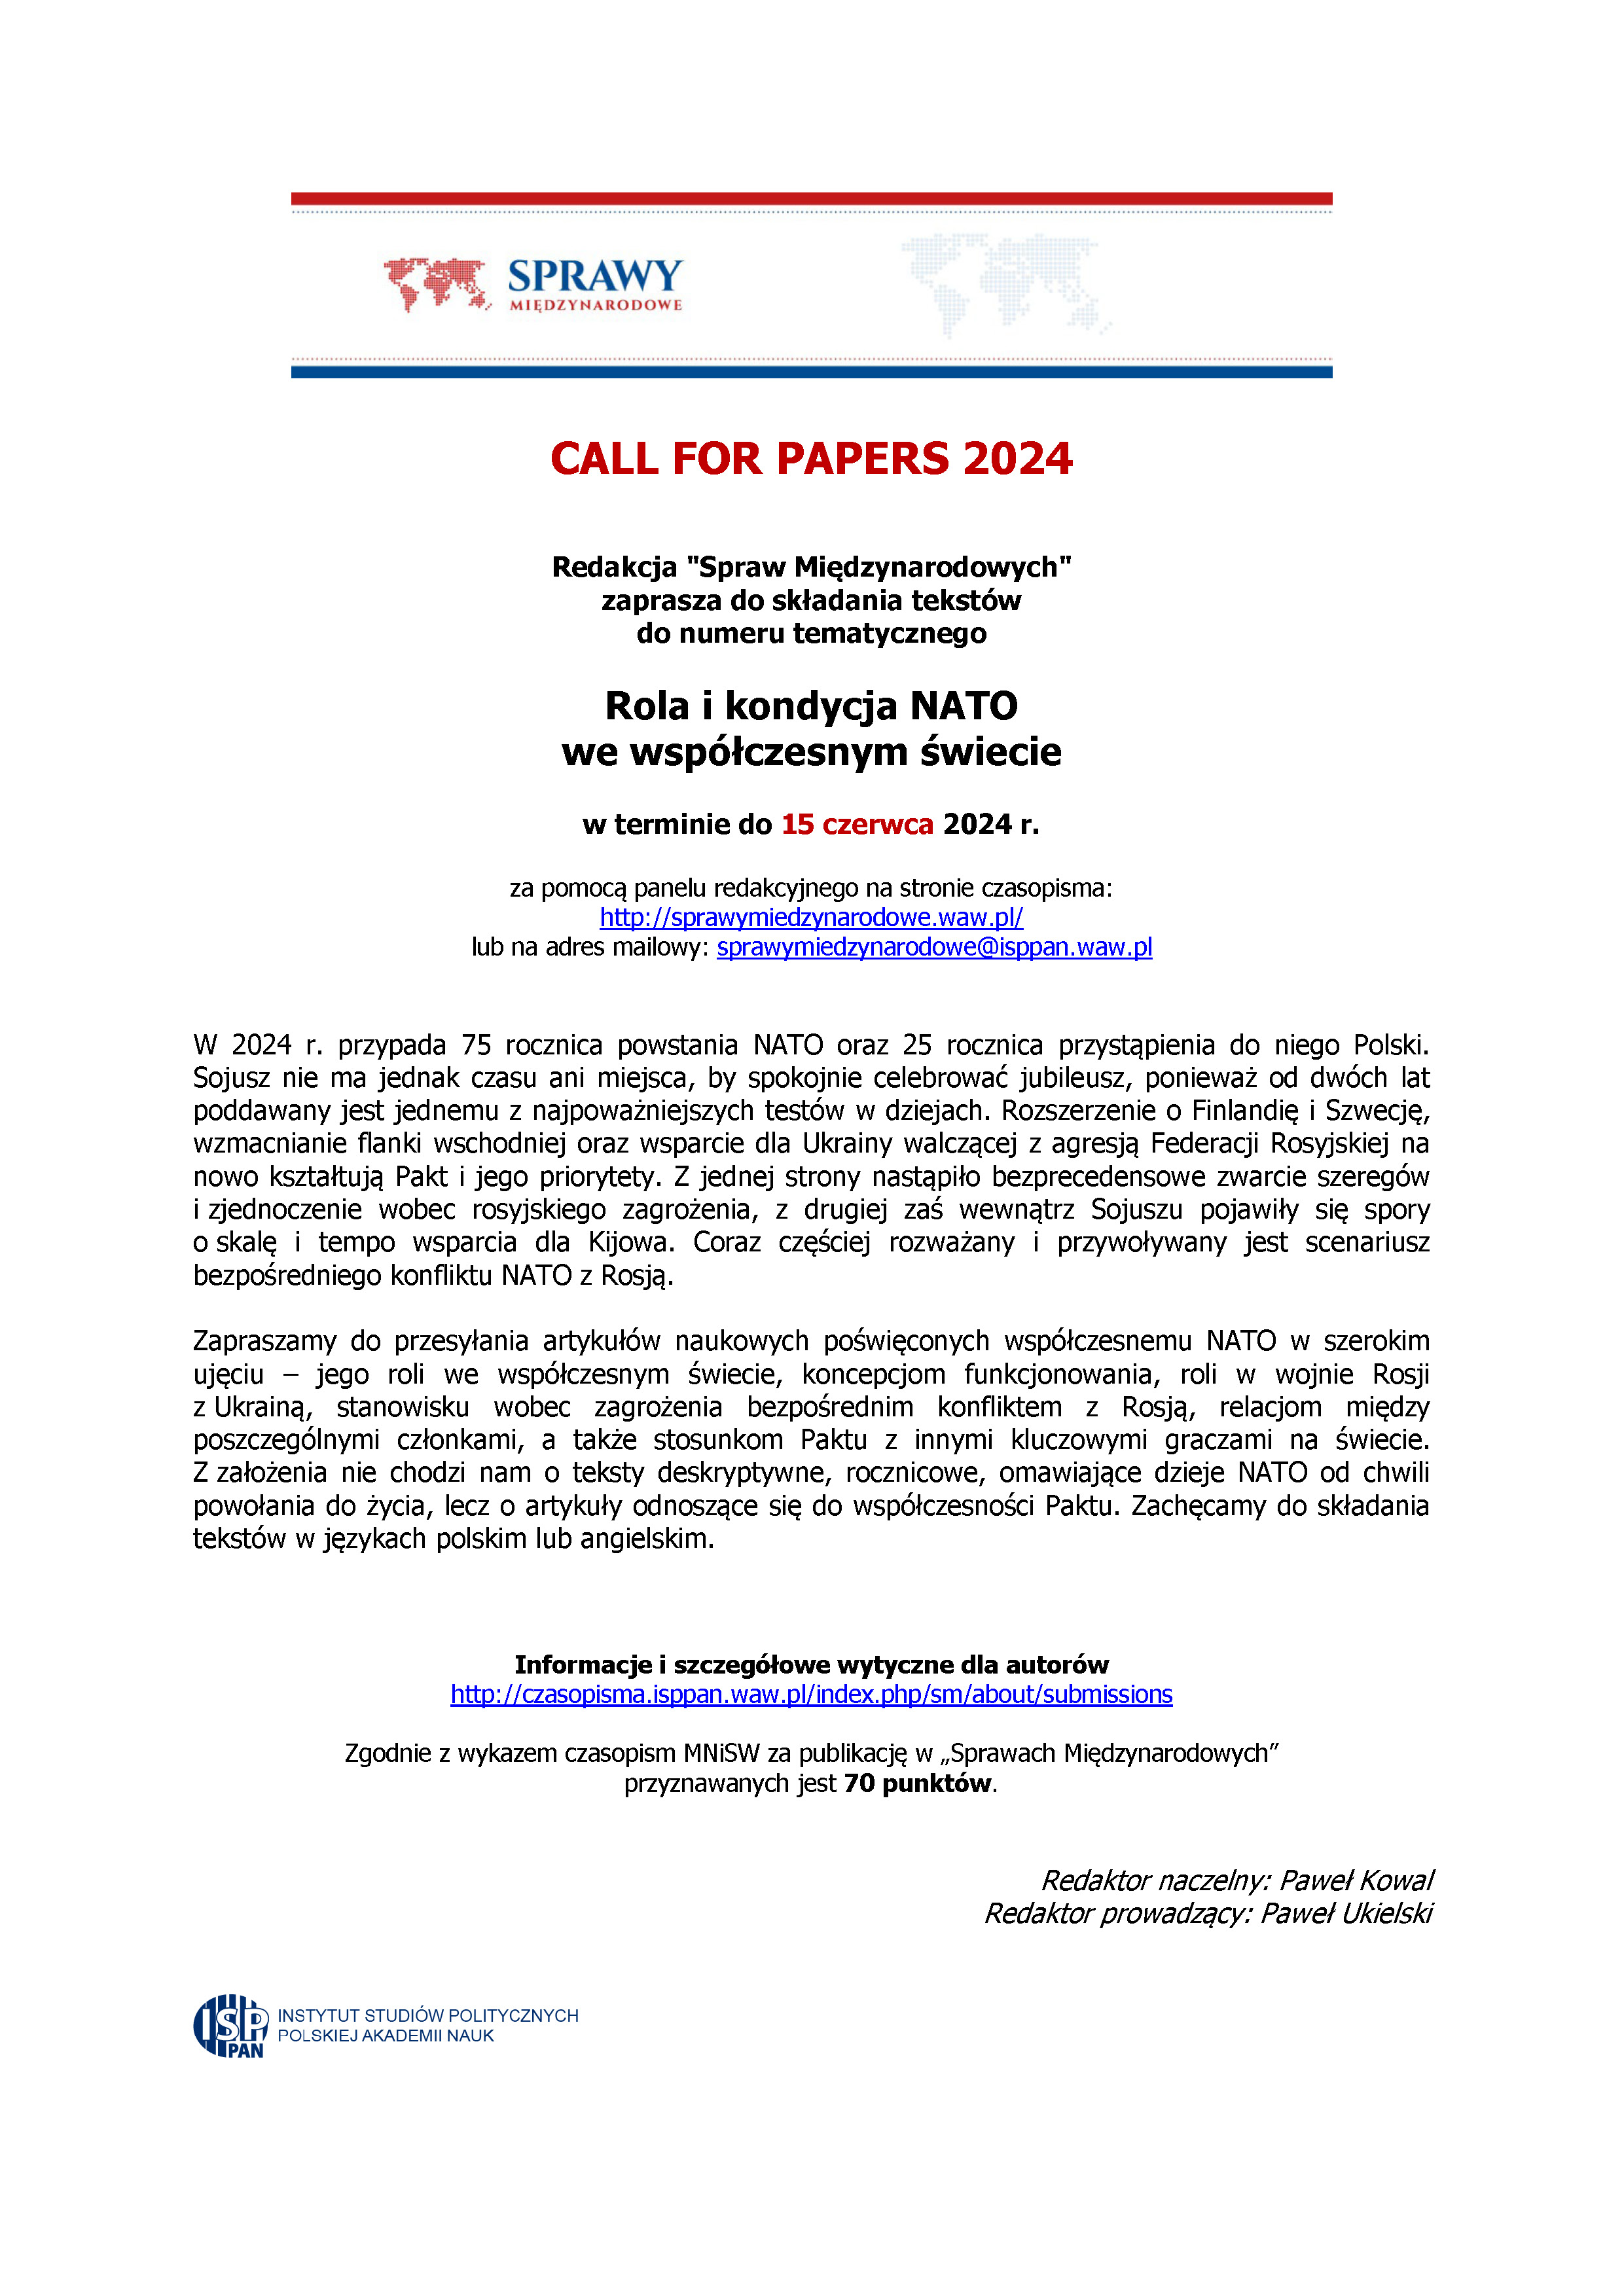 SM_2024_call_for_papers_PU.jpg